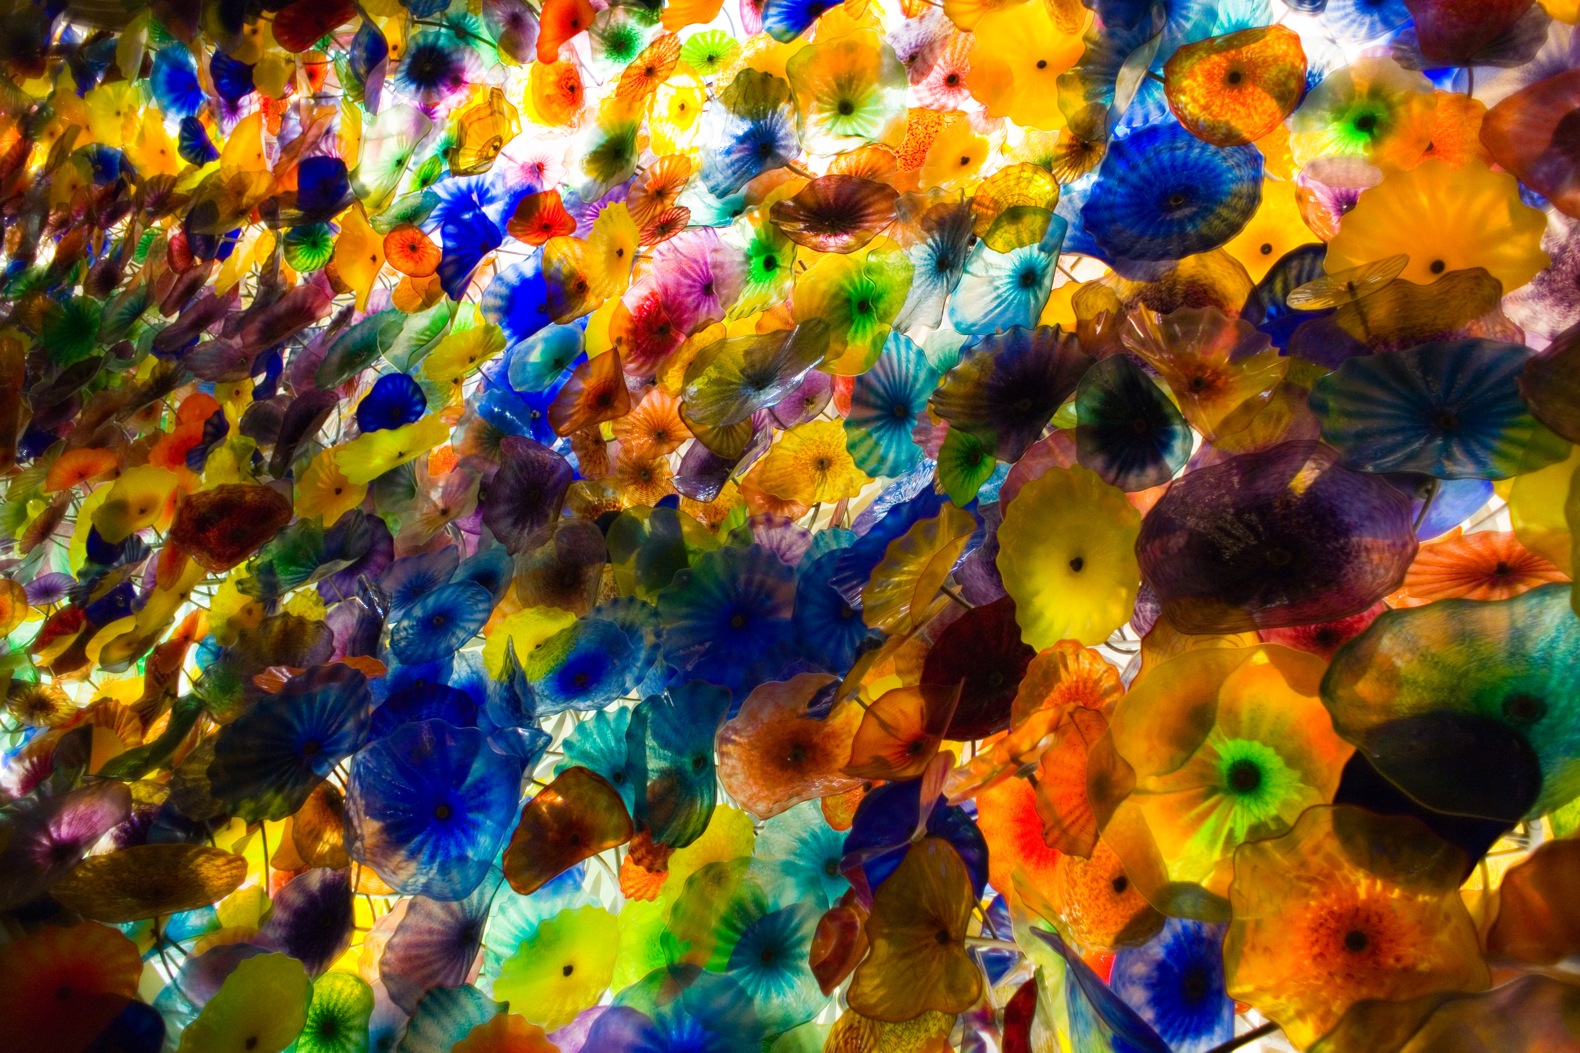 And Adorable Dale Chihuly Wallpaper